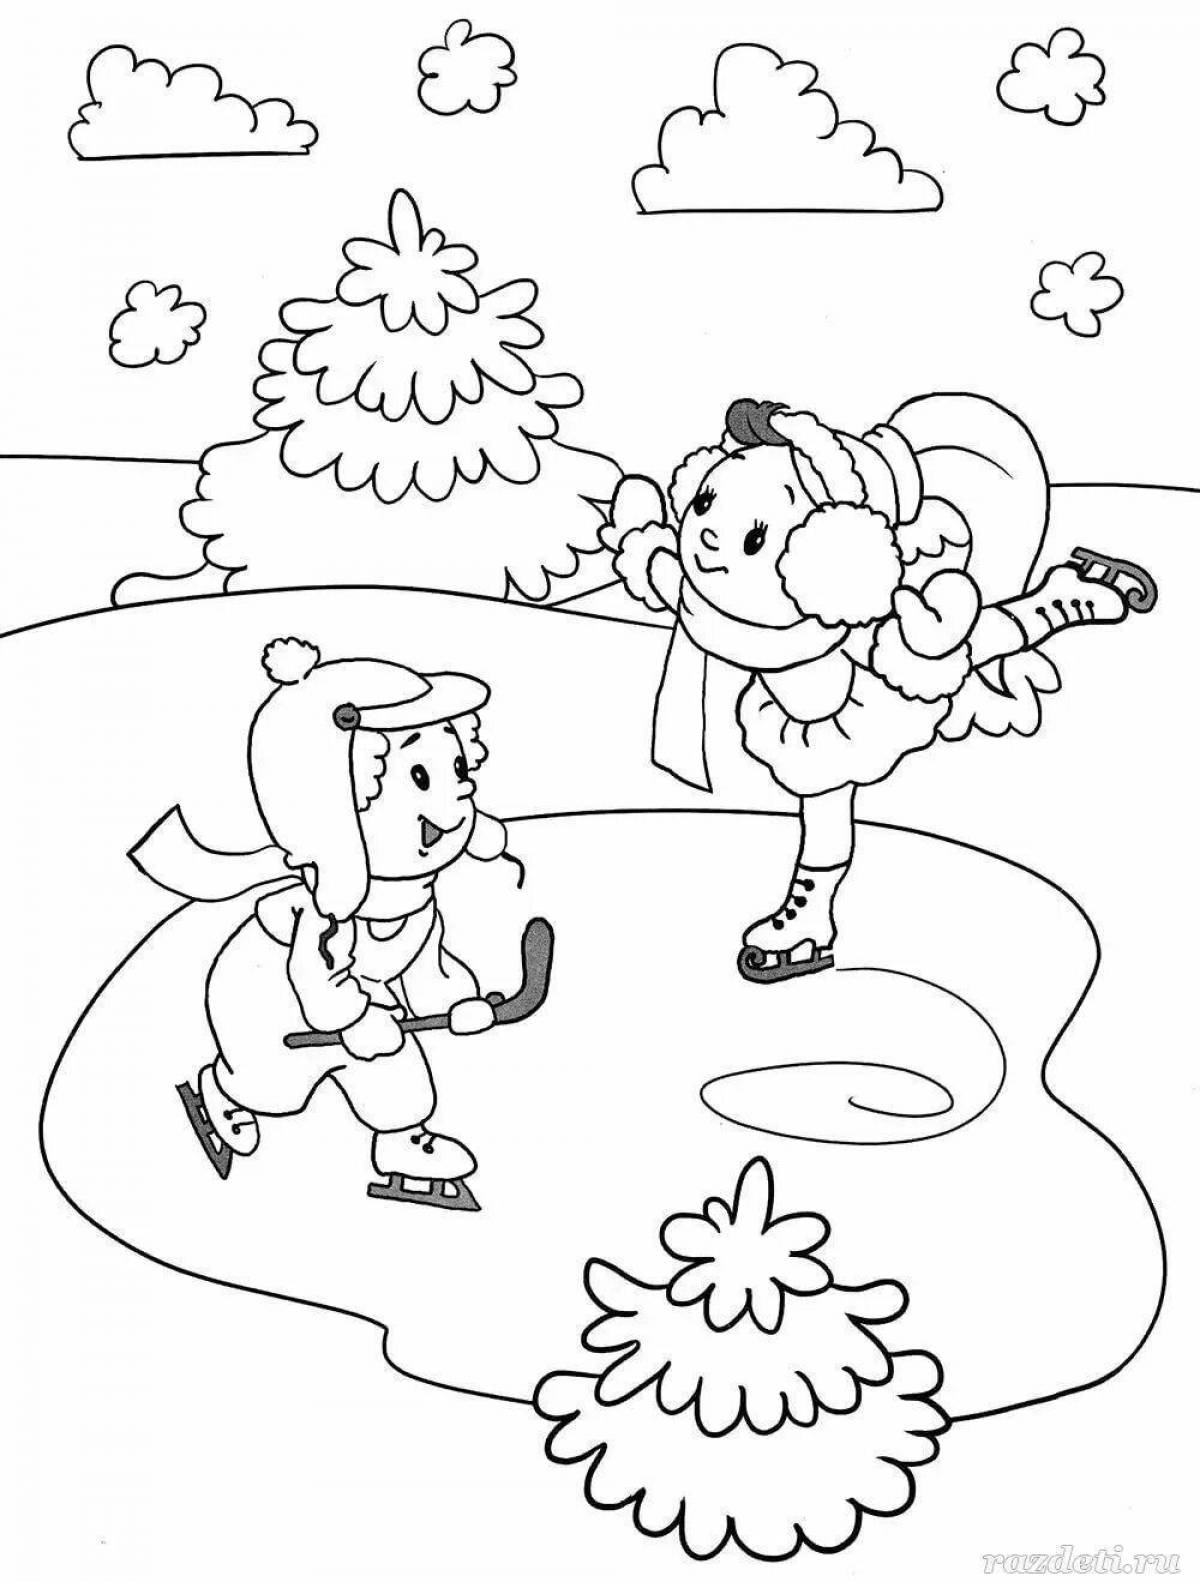 Colourful winter senior group coloring page